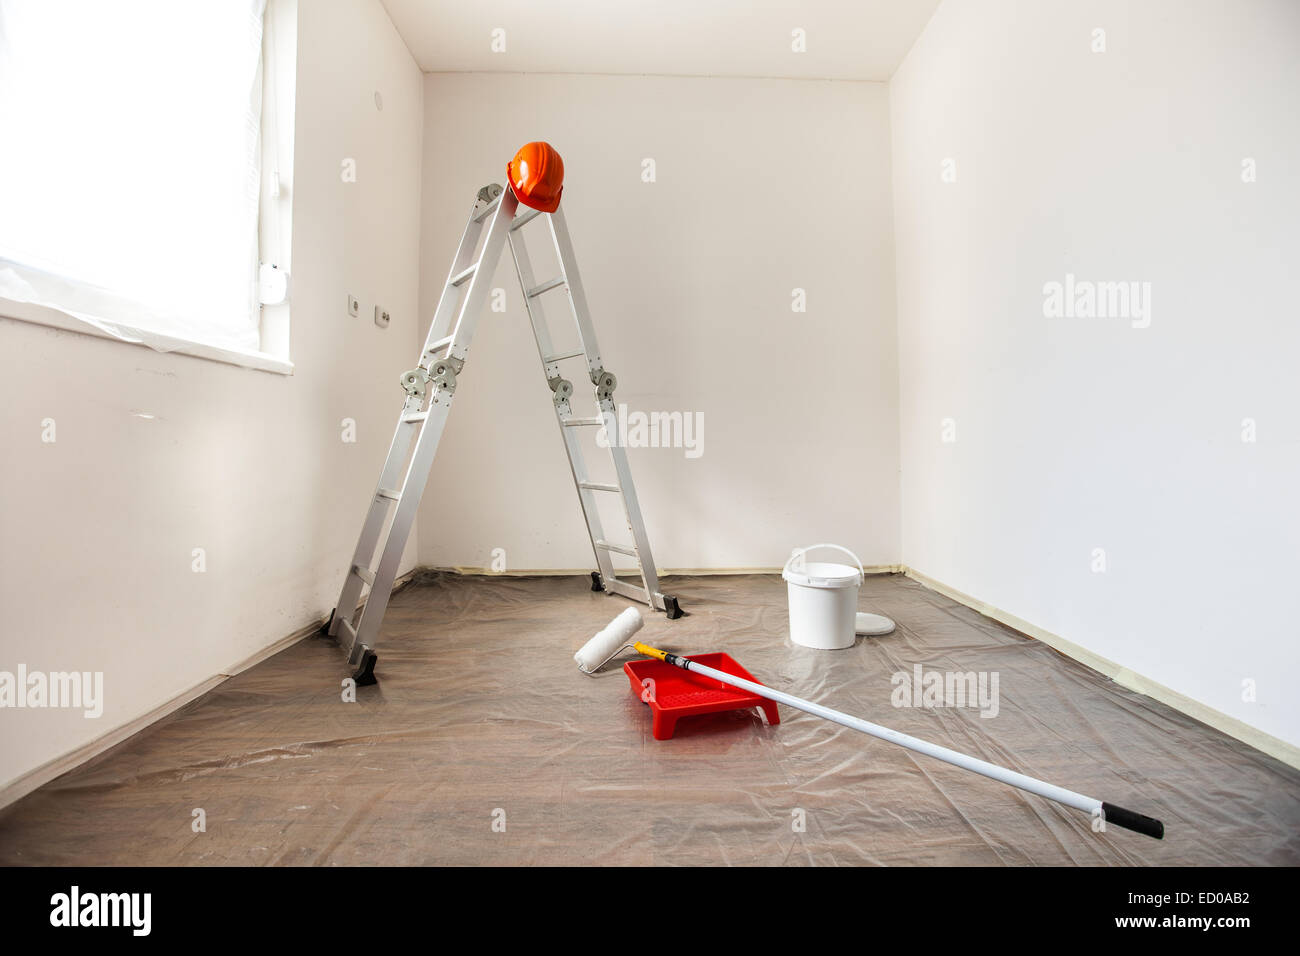 Several painting tools prepared for painting a room. Stock Photo